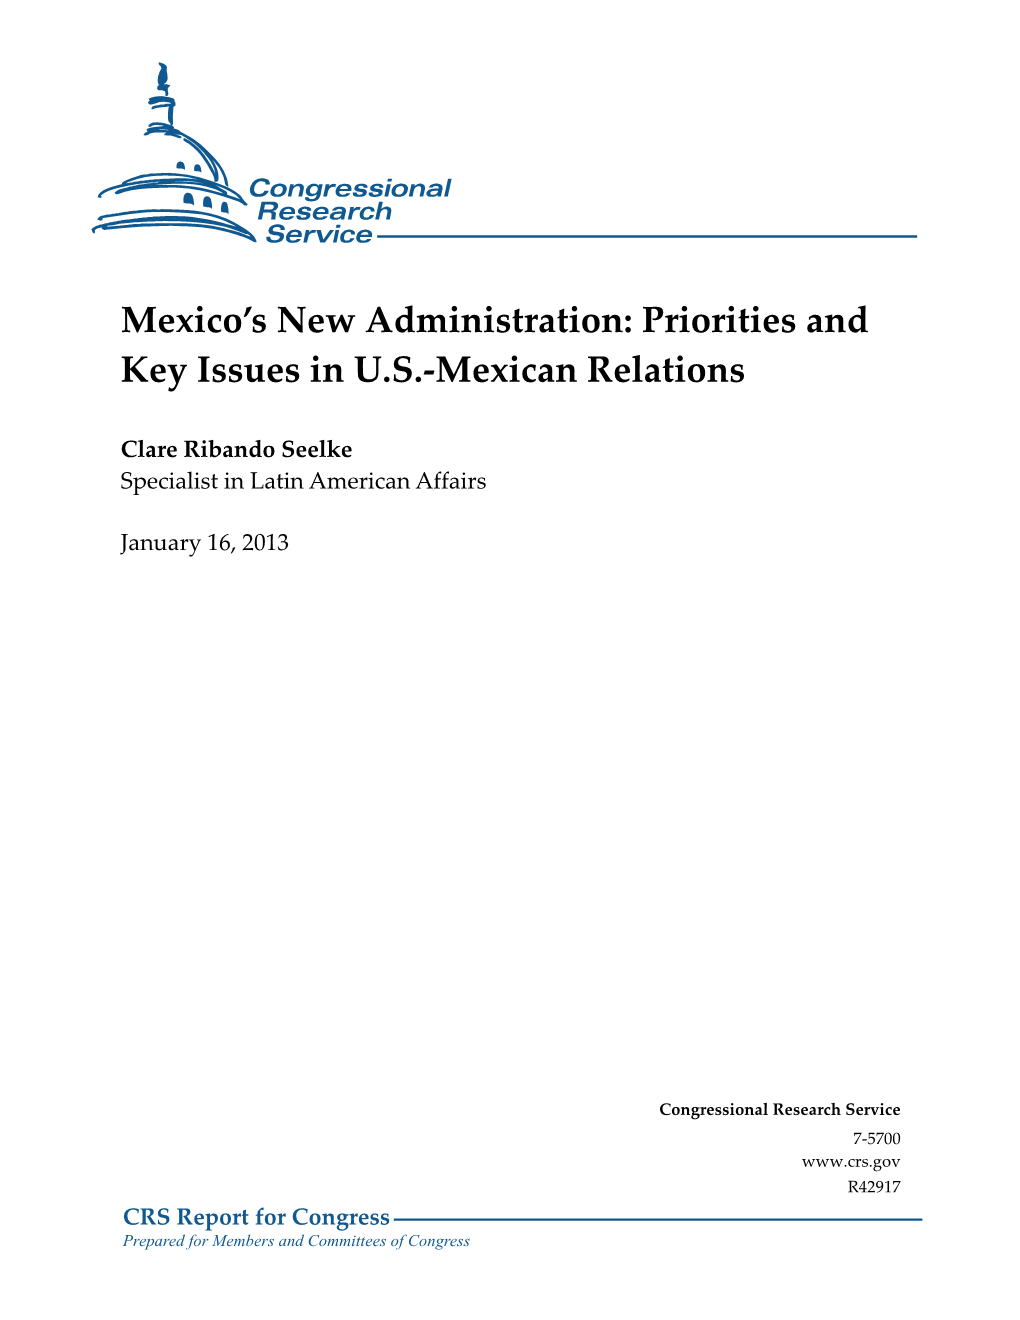 Mexico's New Administration: Priorities and Key Issues in U.S.-Mexican Relations